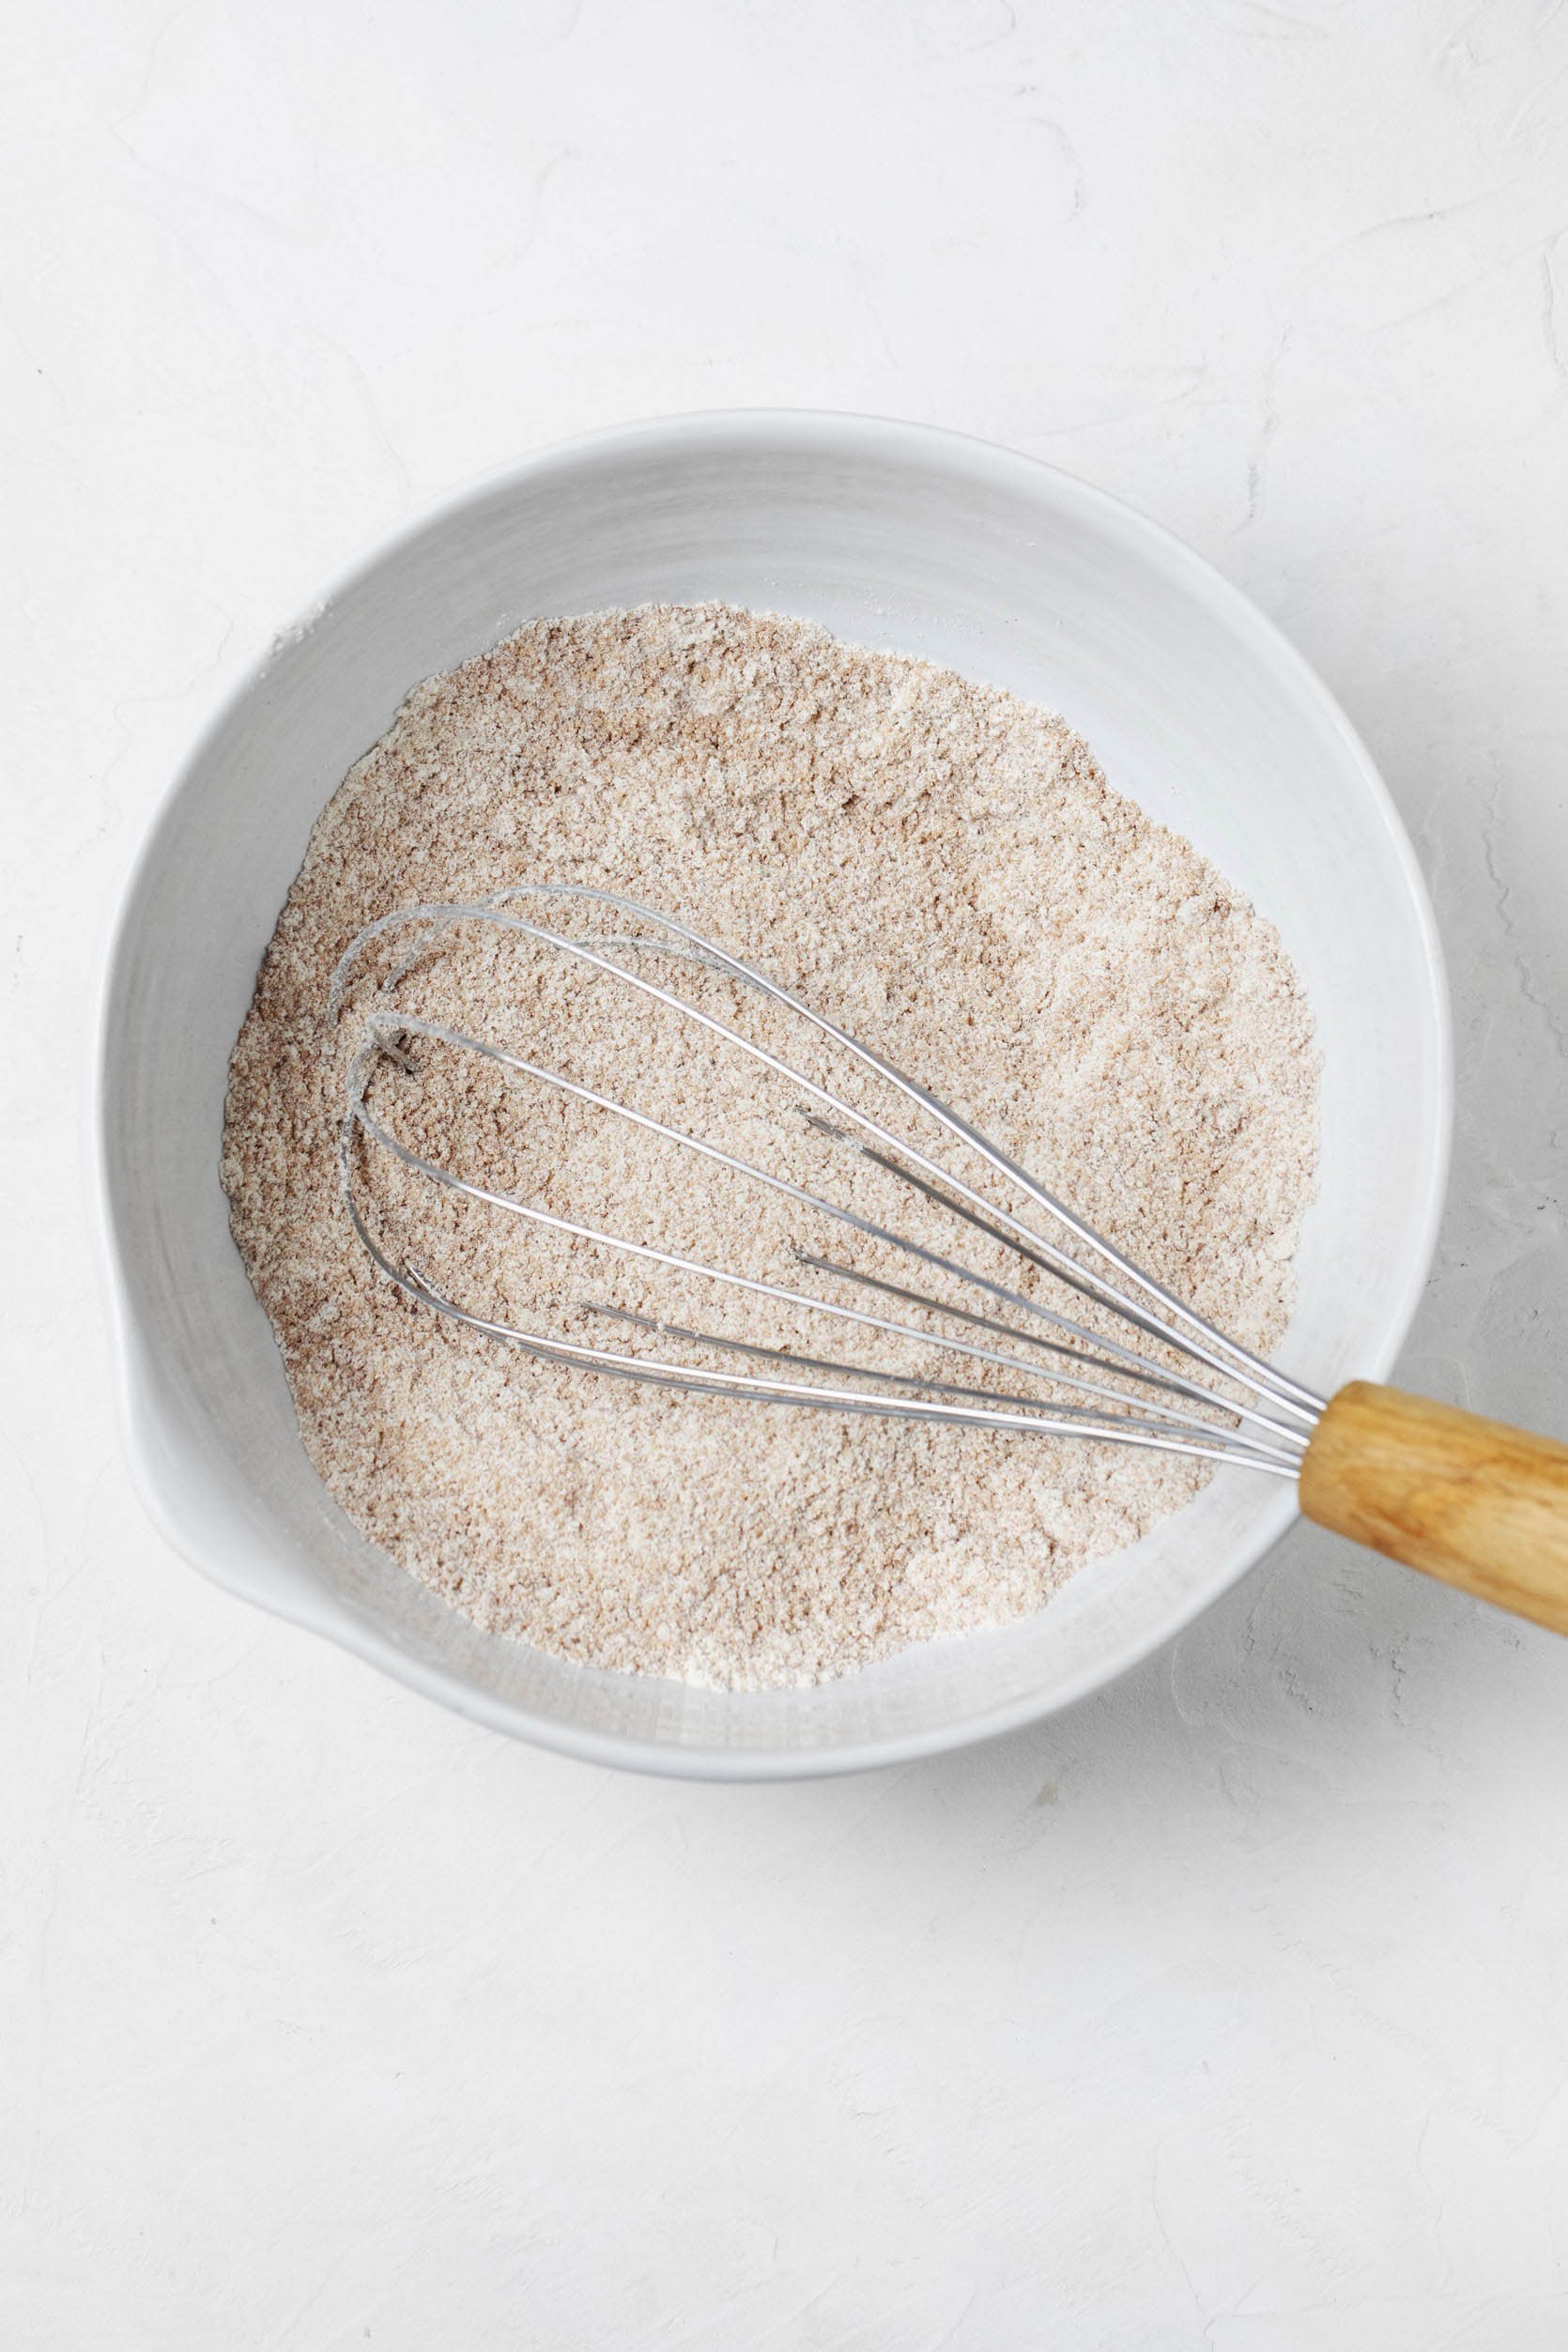 Dry ingredients, including all-purpose flour, cinnamon, and sugar, are pictured overhead in a white mixing bowl.